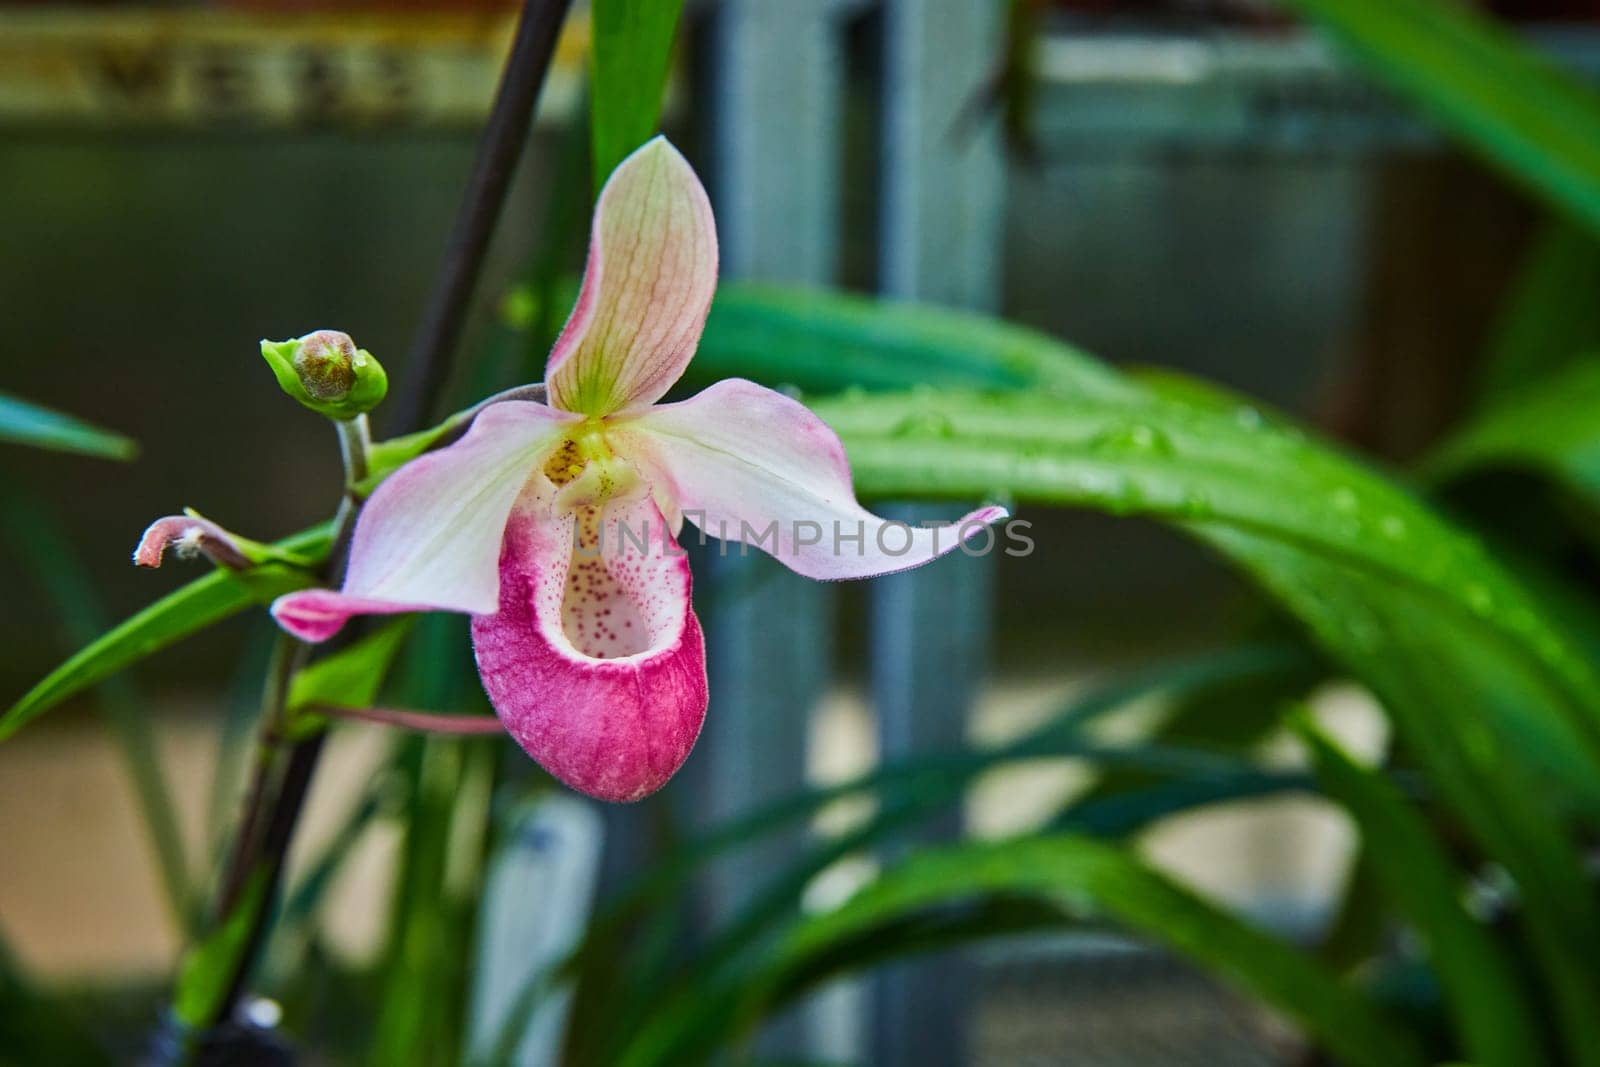 Vivid Pink Orchid Close-Up with Water Droplets in Greenhouse by njproductions